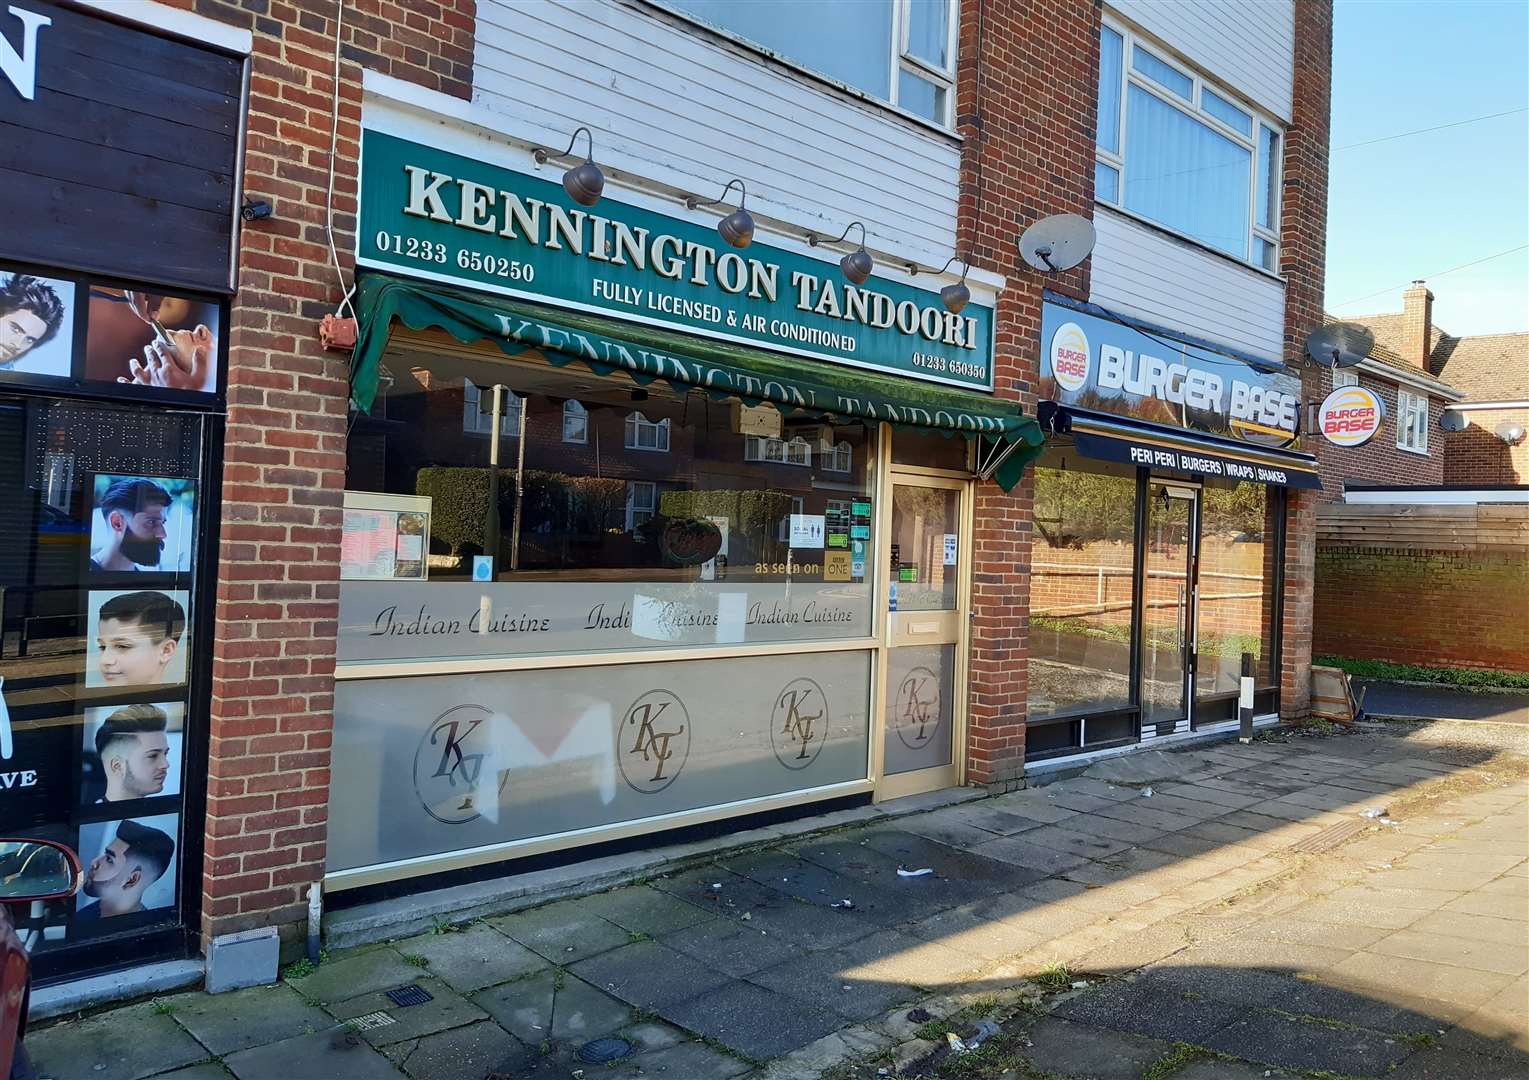 Ash Miah also owns the Kennington Tandoori, located next door to the new diner